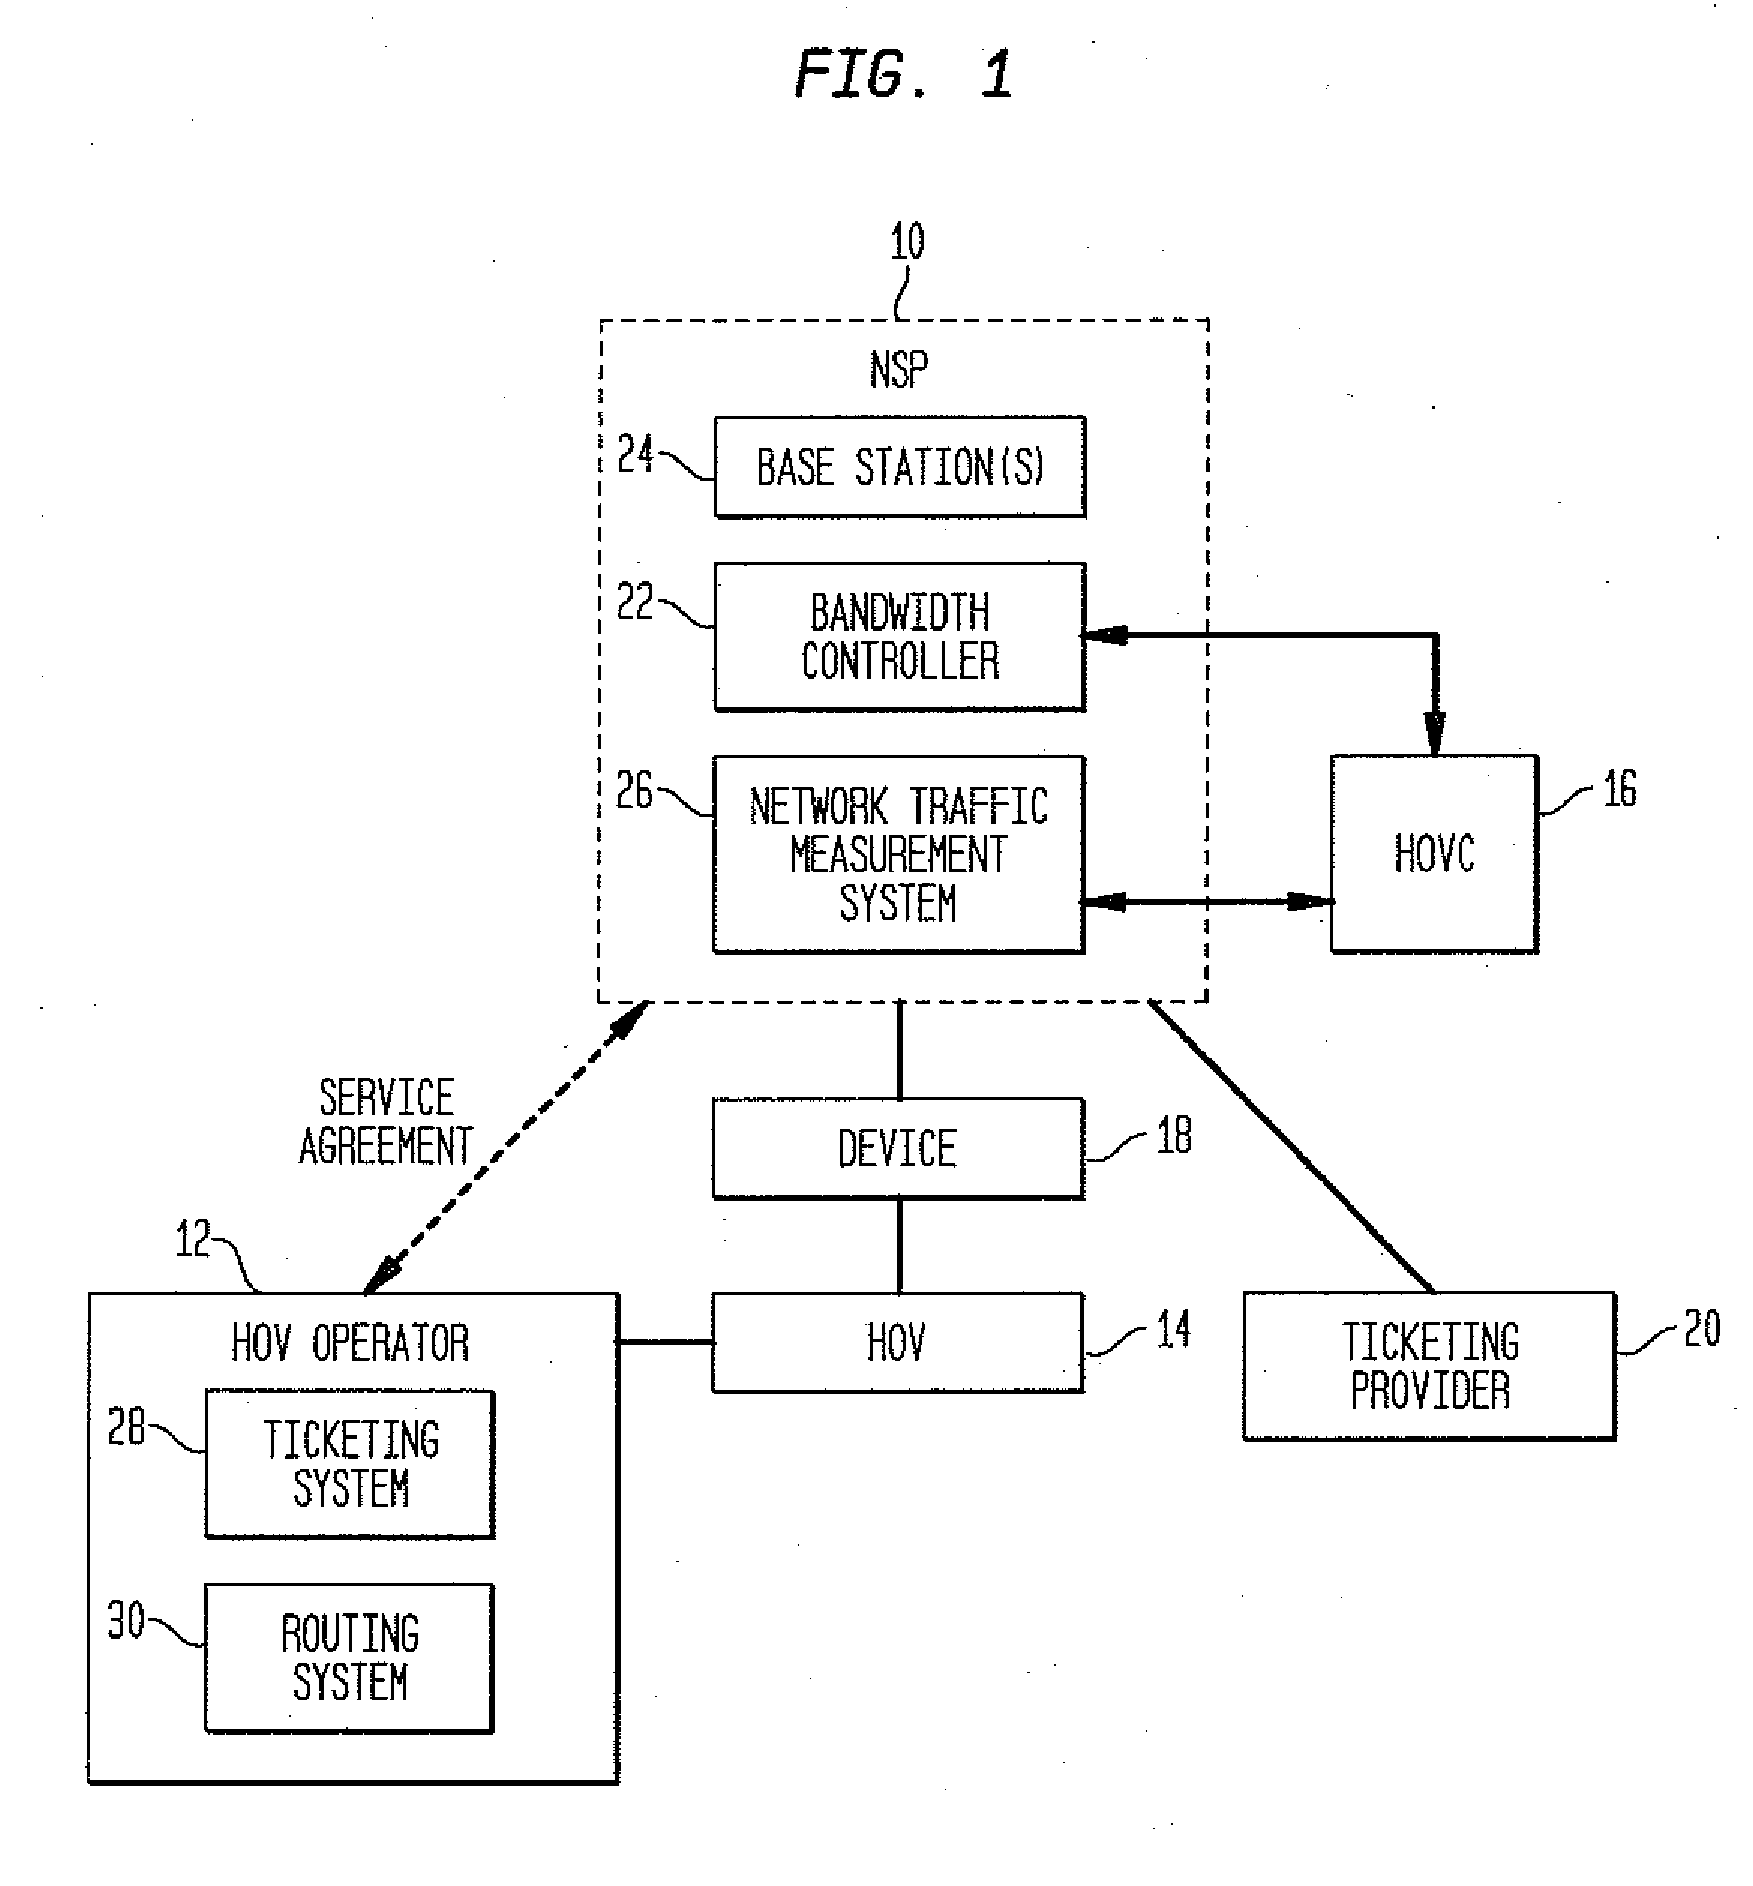 Method and system to manage wireless communications of high-occupancy vehicles